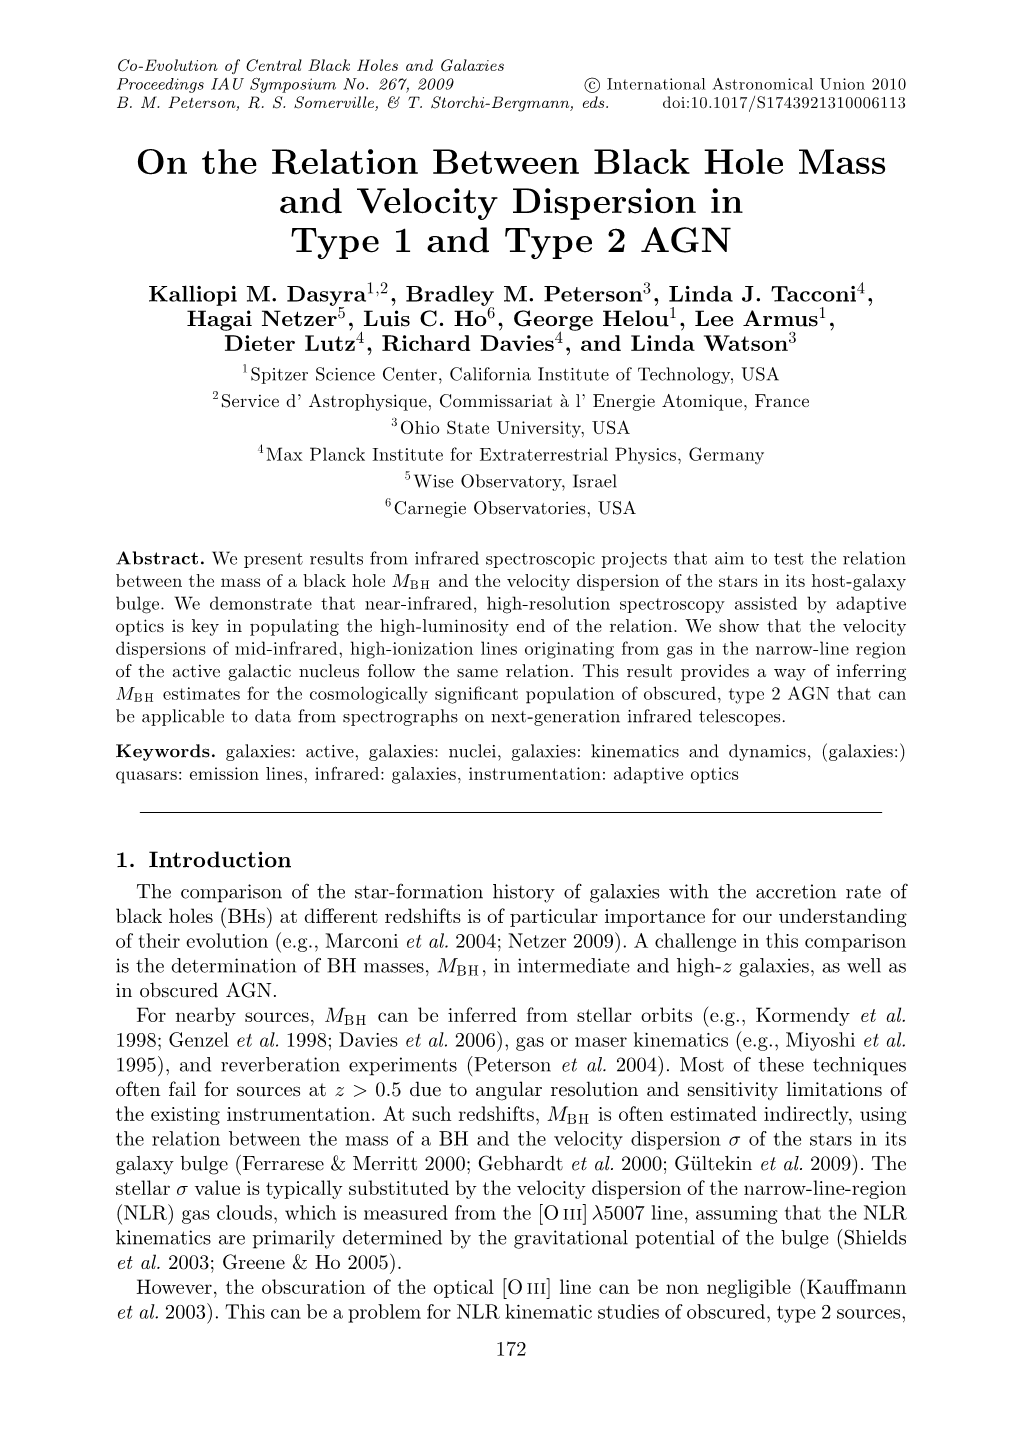 On the Relation Between Black Hole Mass and Velocity Dispersion in Type 1 and Type 2 AGN